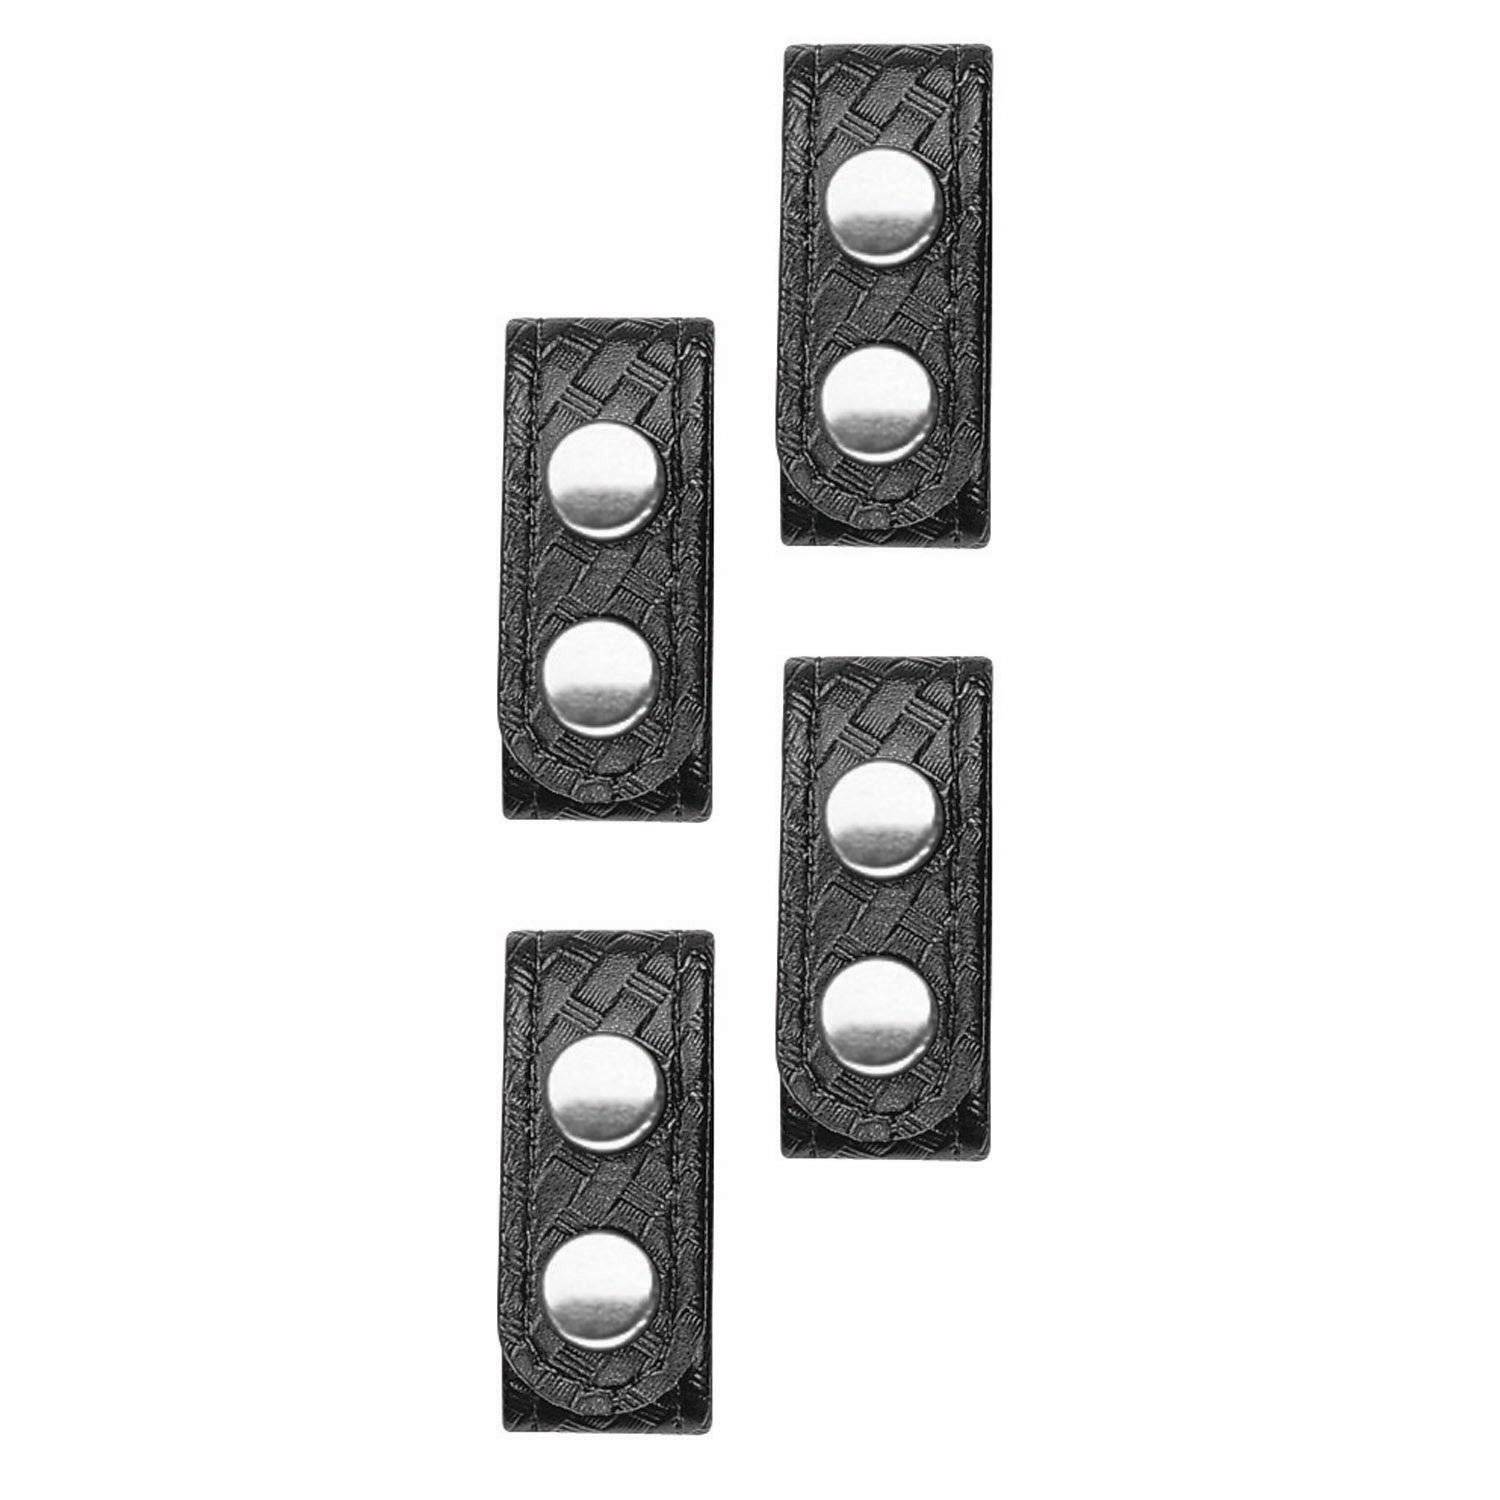 Bianchi 22186 AccuMold Elite Plain Leather Belt Keepers Brass Snap 4 Pack 